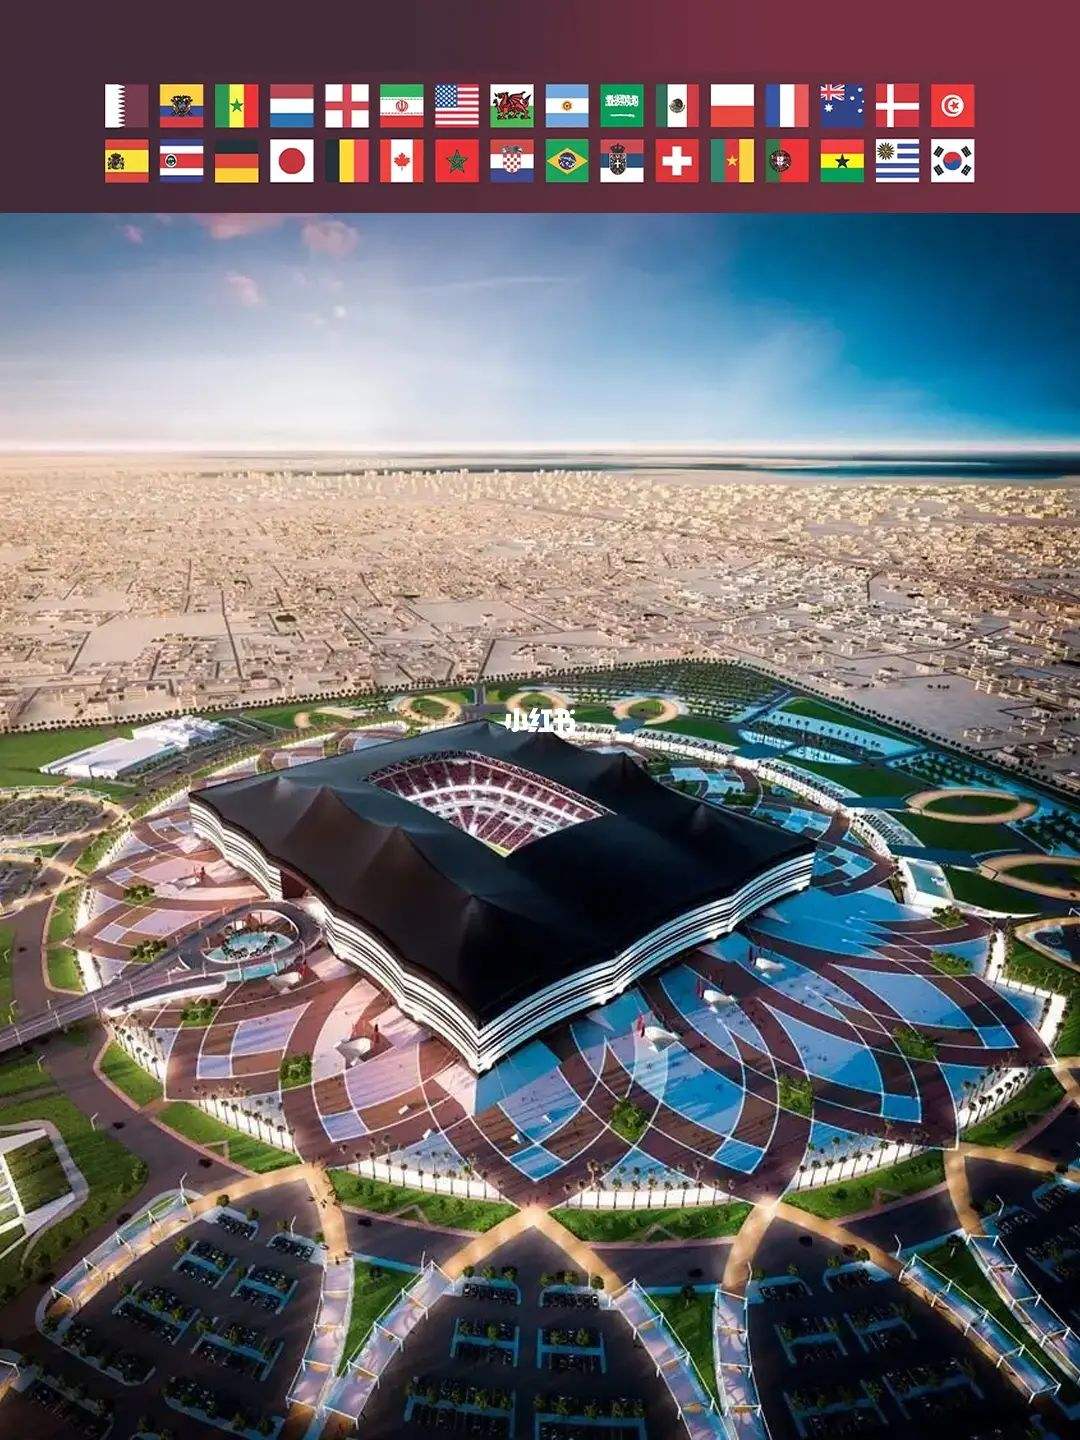 Different styles of Qatar World Cup stadium cooling system! Let’s find out!